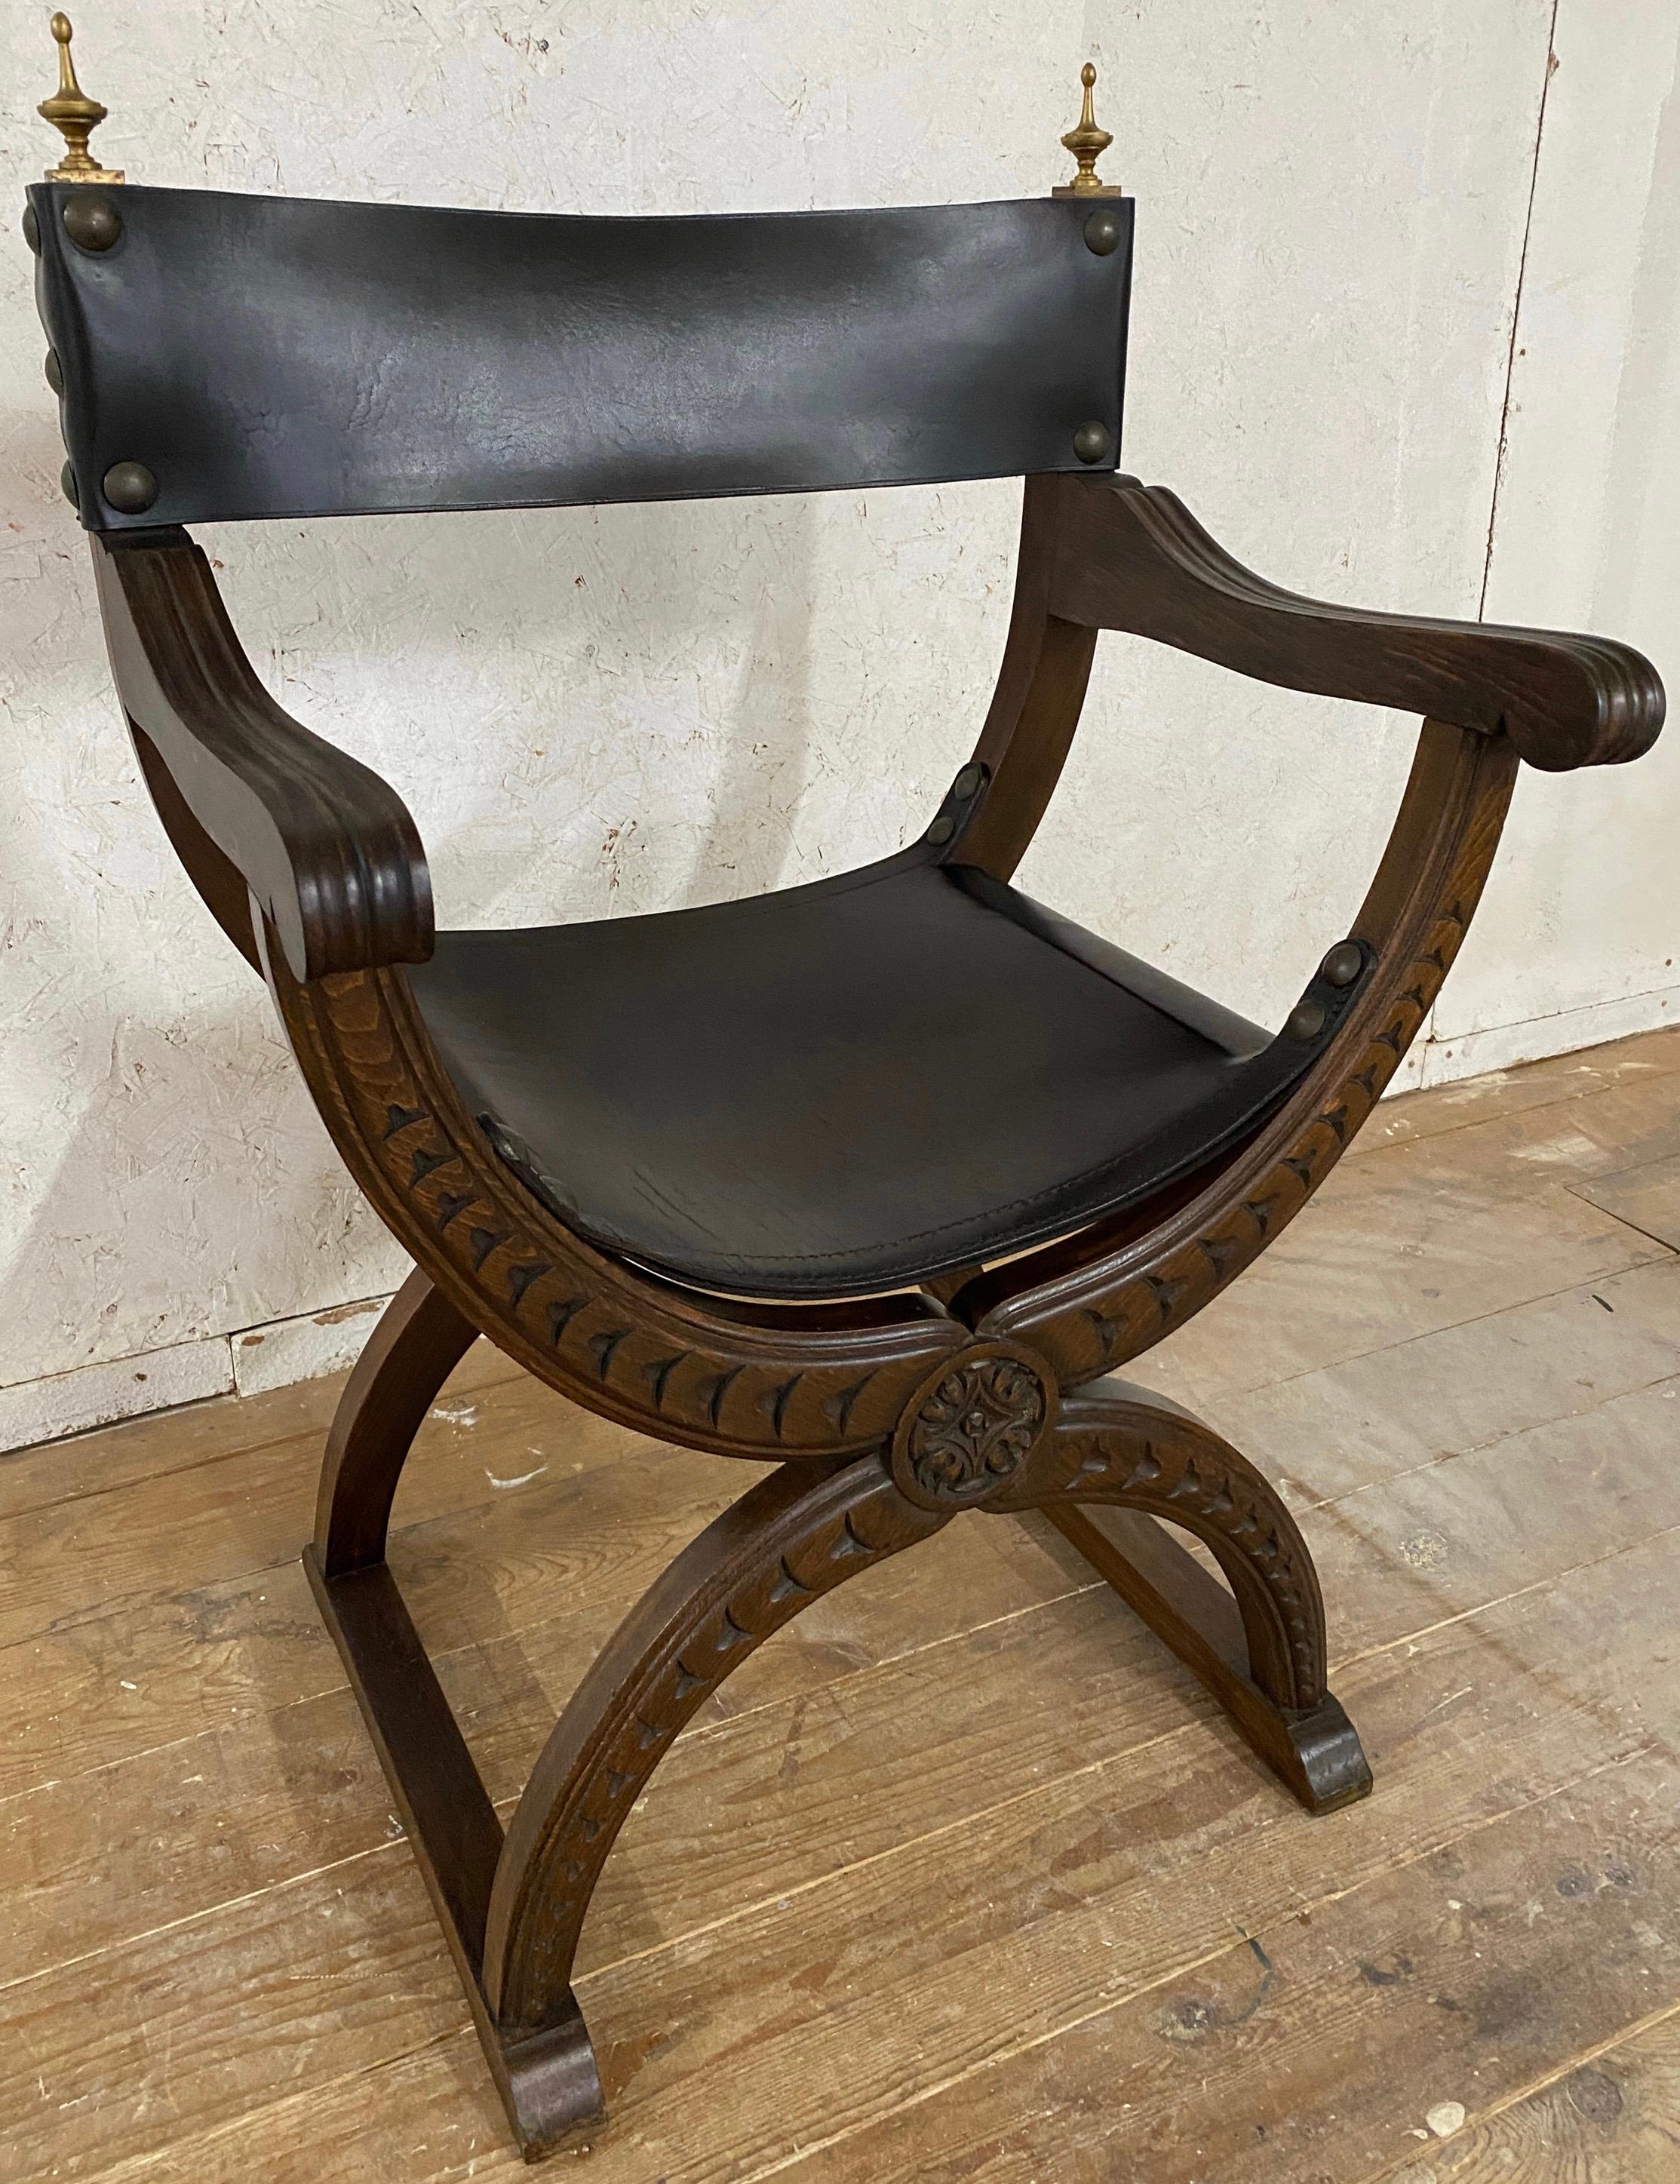 A very handsome 19th Century continental renaissance style Curule Savonarola
armchair or throne chair. This beautifully carved Gothic style chair with seat and back in black leather with large nail heads and brass urn finials. Solid carved wood